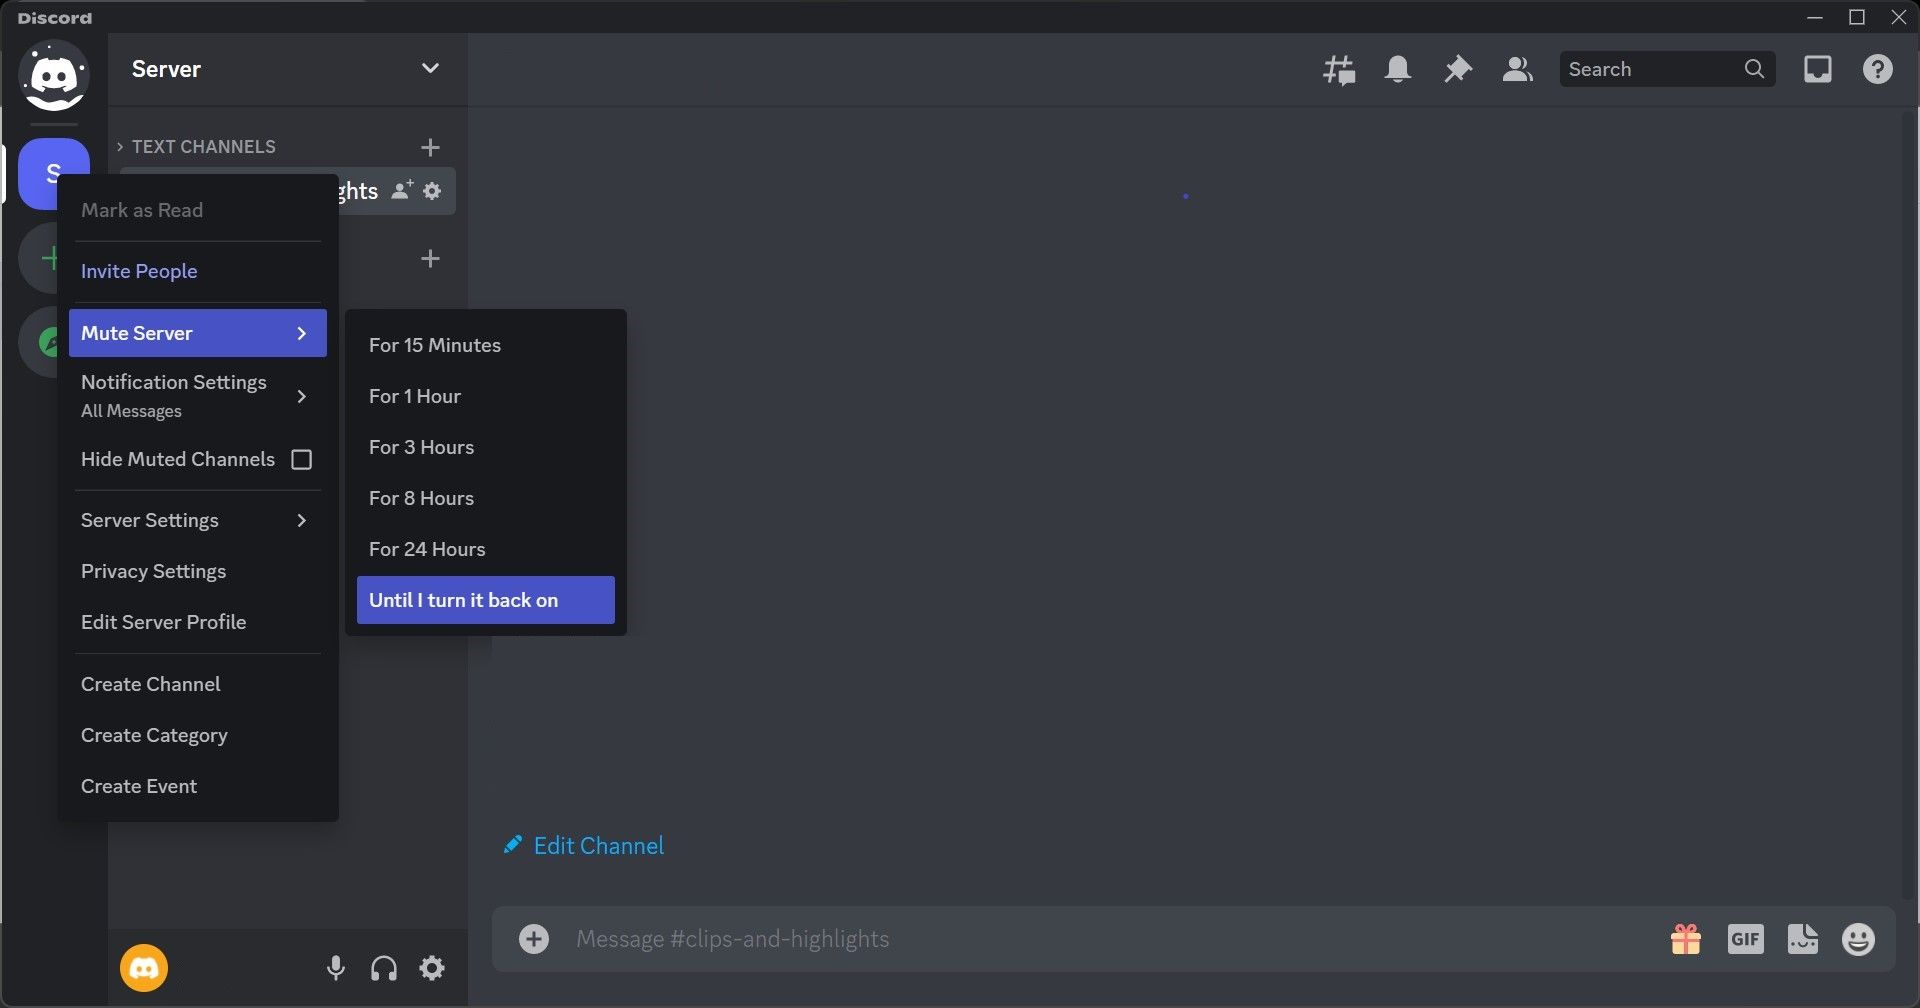 Muting Server For an Indefinite Time in the Discord App